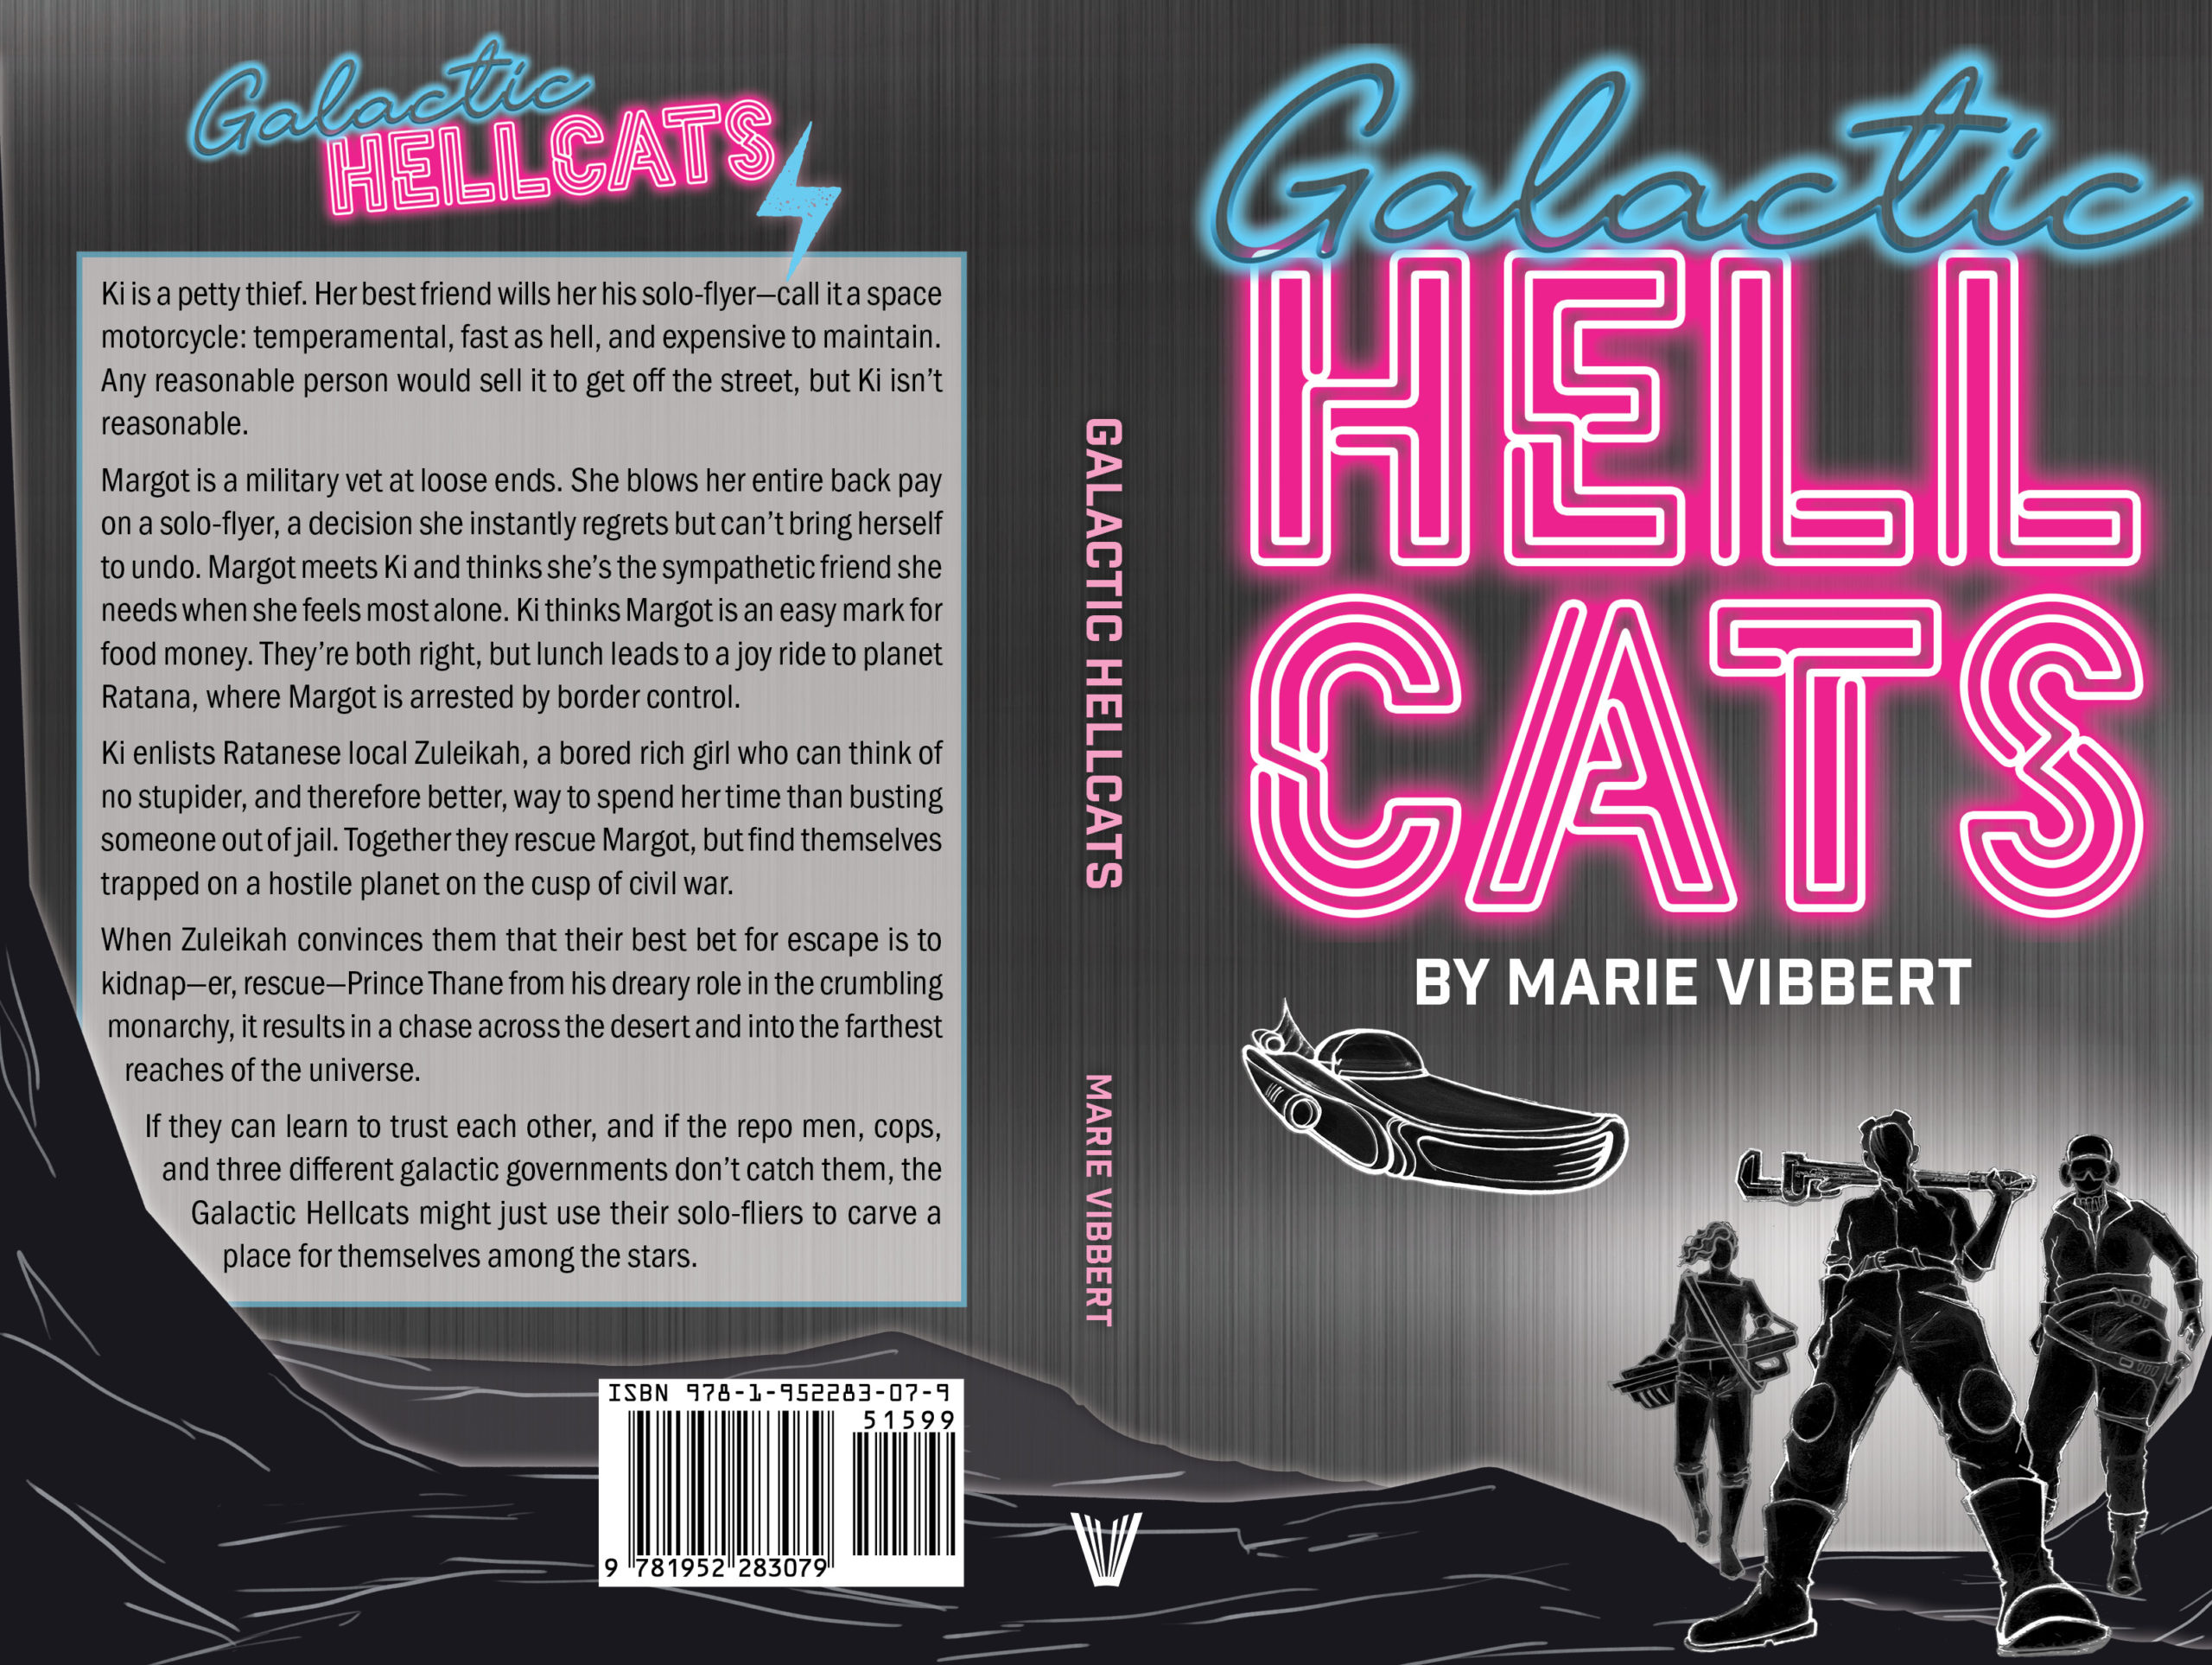 The full cover spread of the novel Galactic Hellcats with three dramatic female figures in the foreground